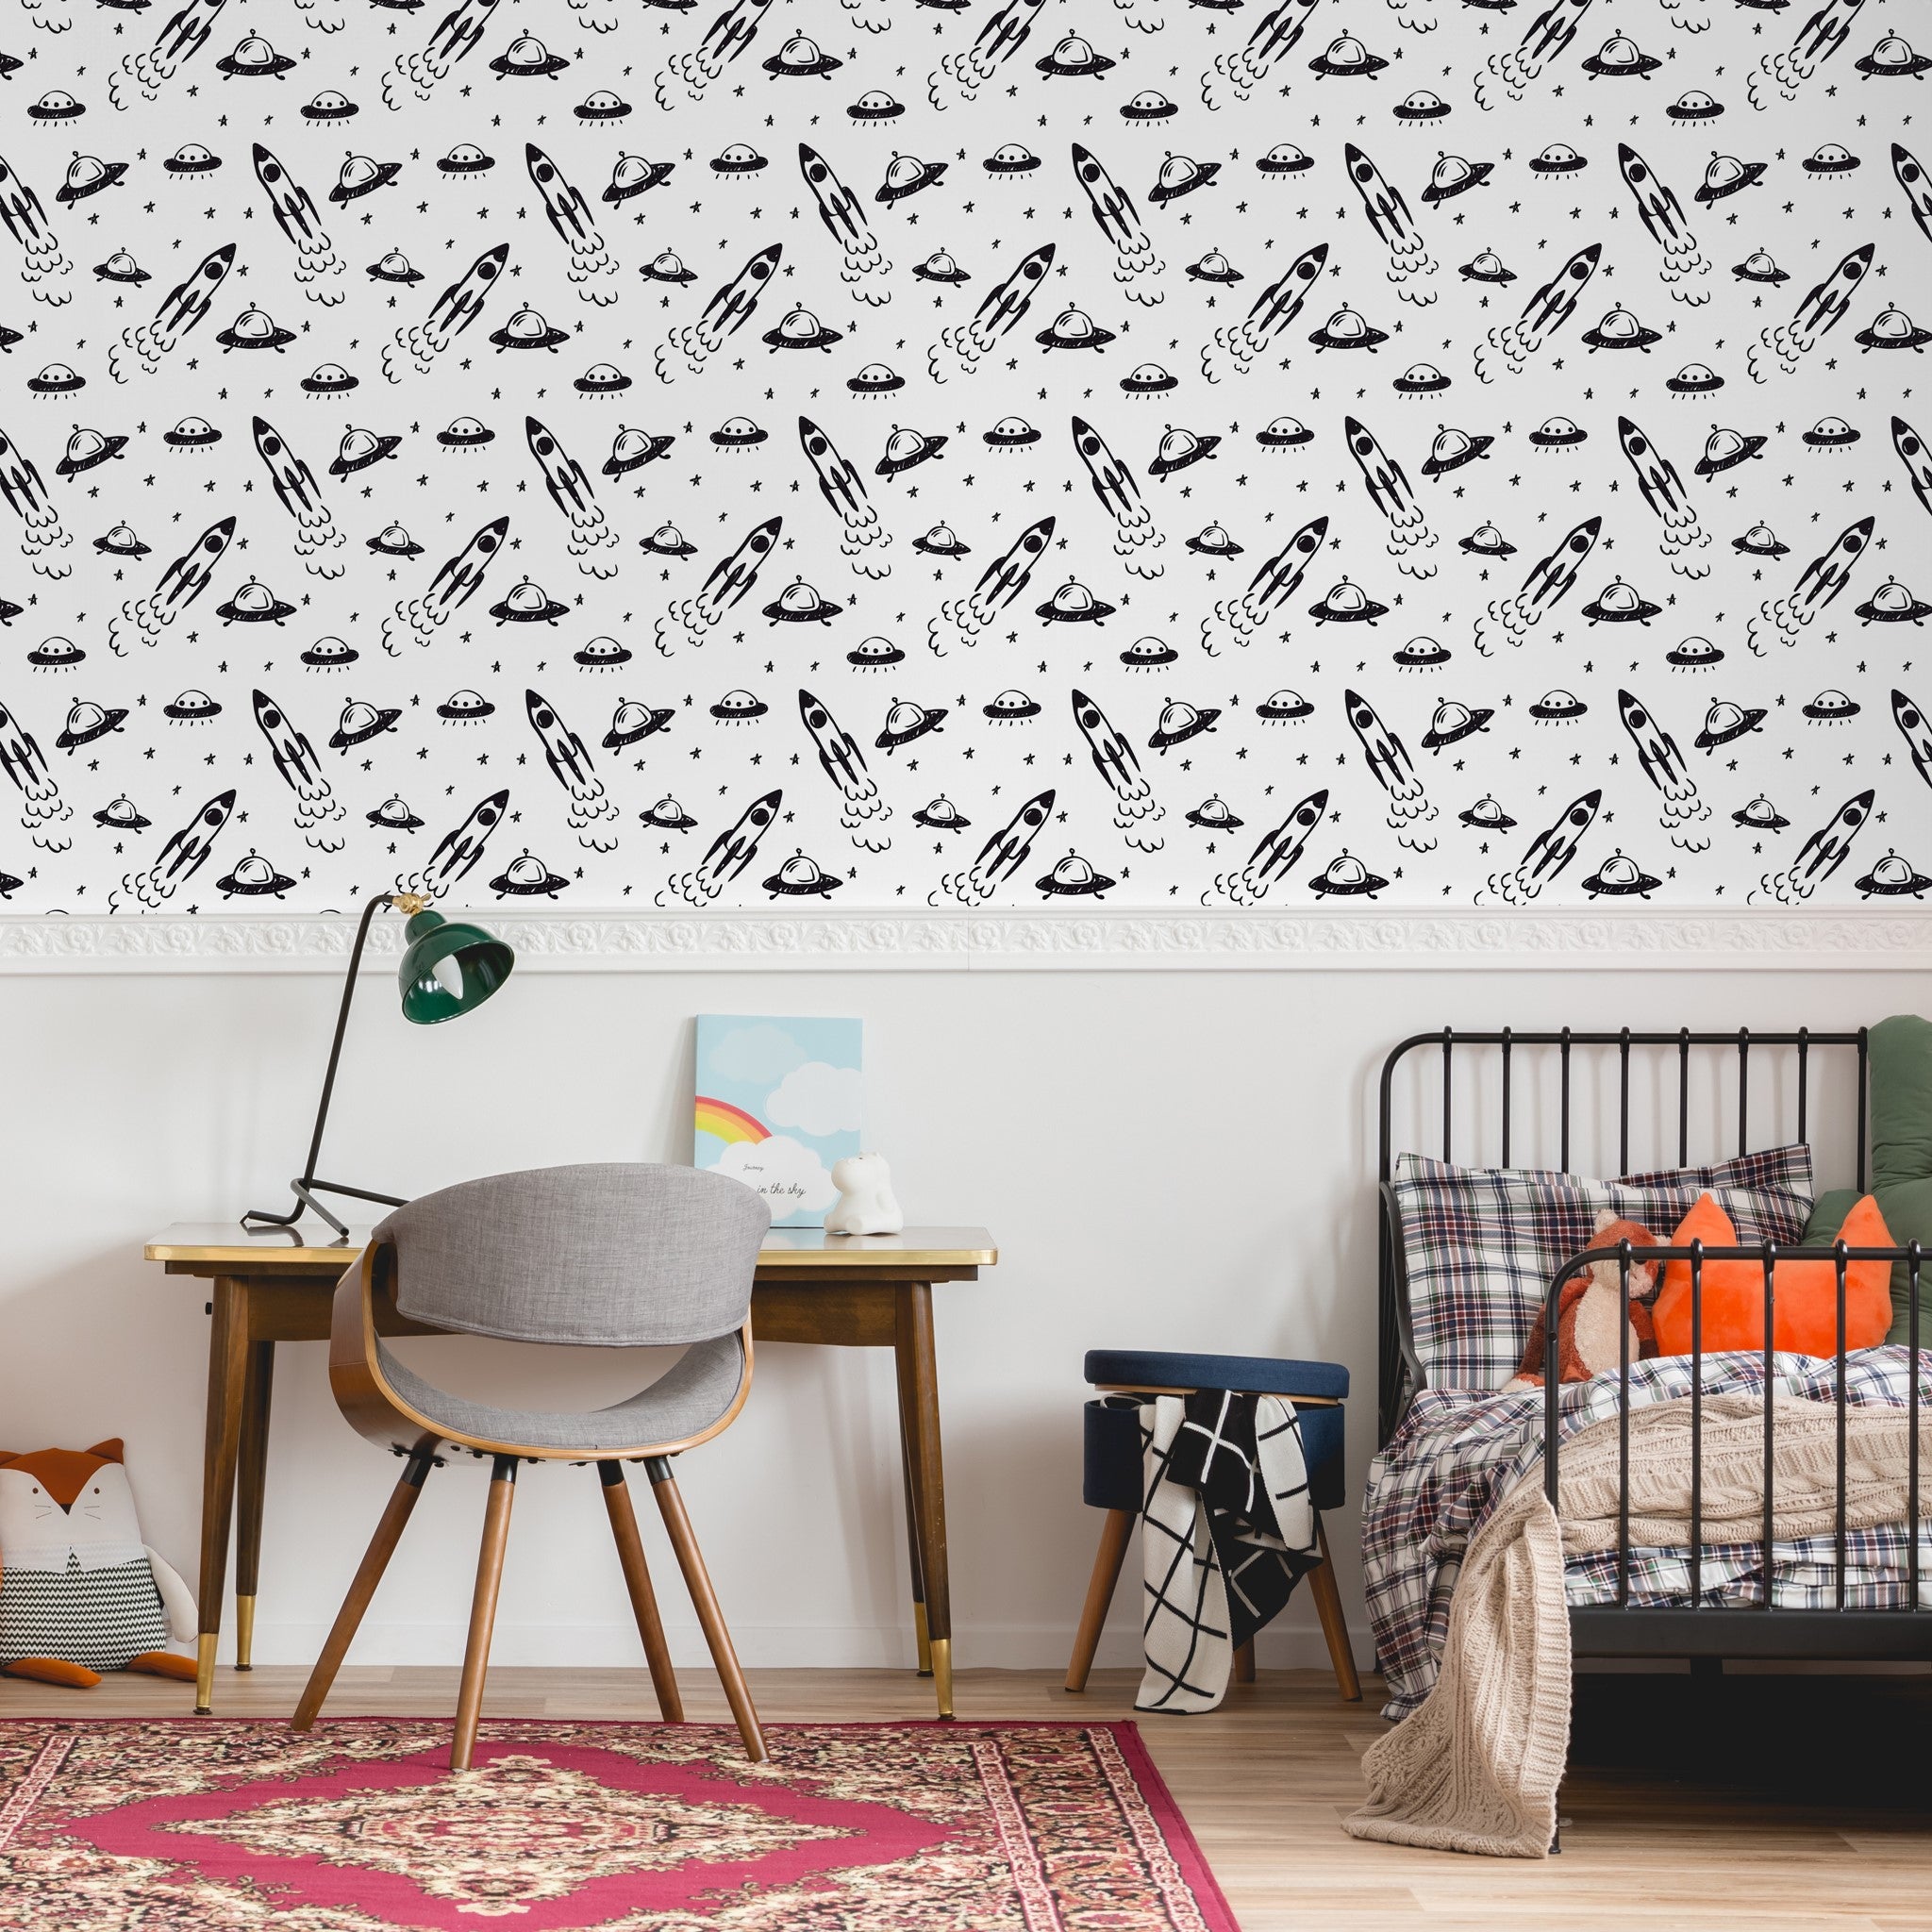 "Child's bedroom featuring Wall Blush's Cosmo Wallpaper with playful spaceship design, highlighting the wall decor."